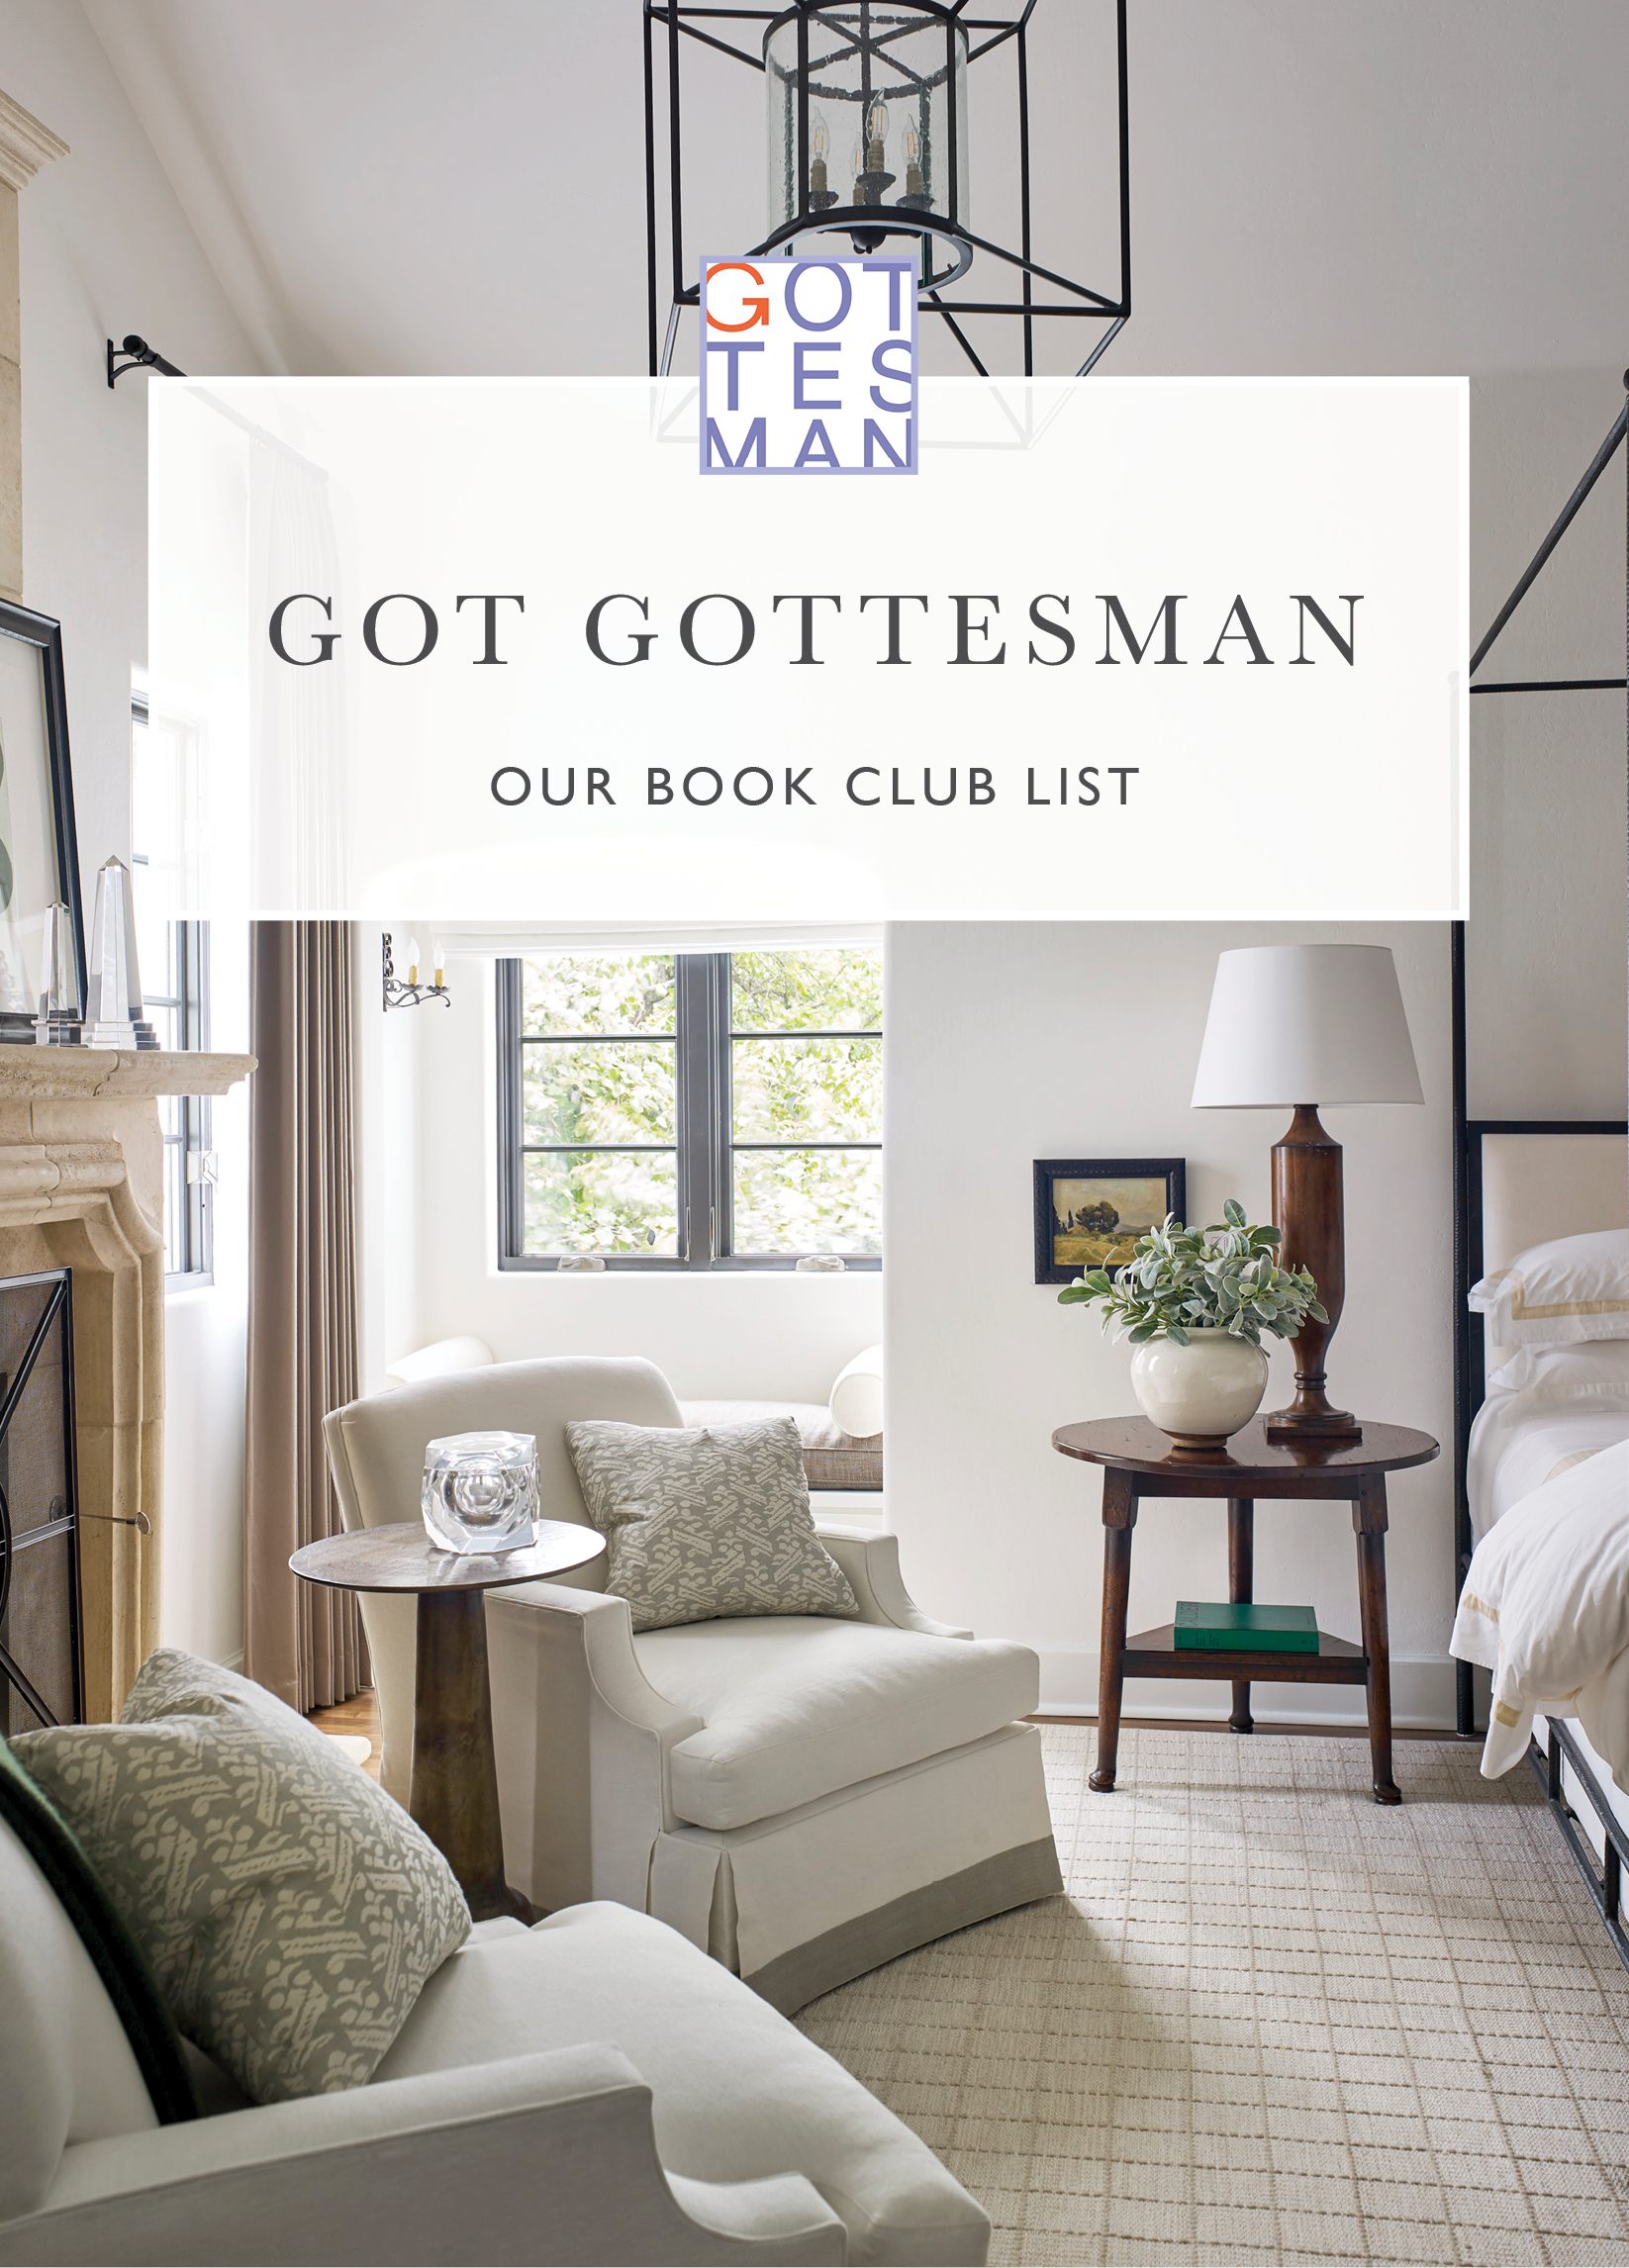 Cozy chairs in bedroom with text overlay, "Got Gottesman: Our Book Club List"